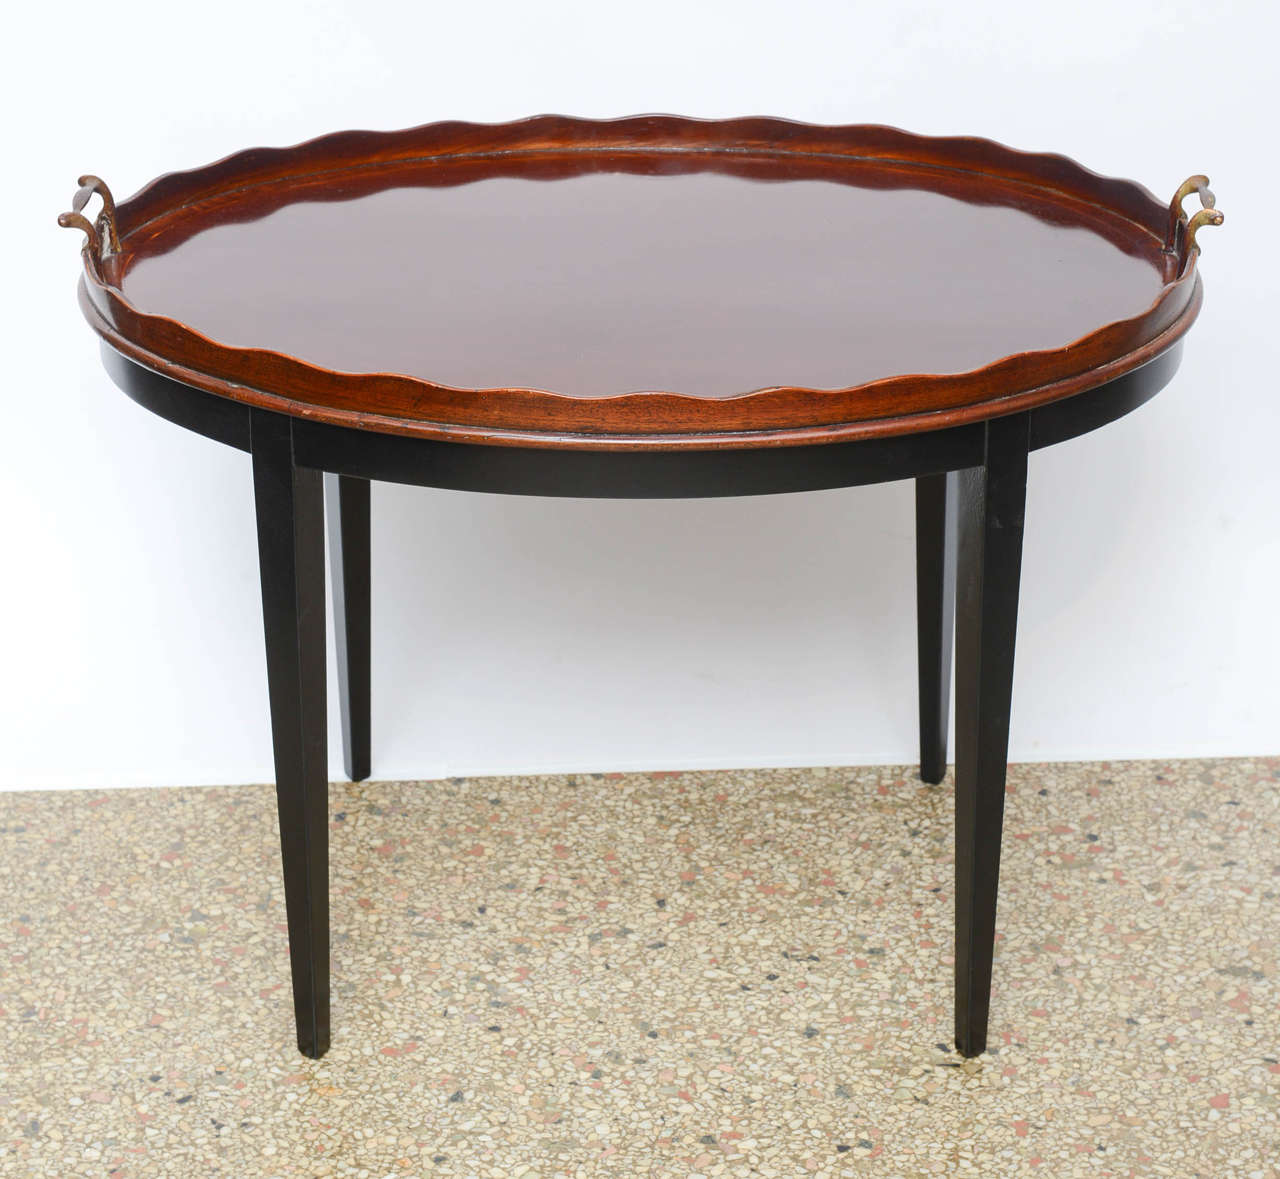 British Regency Style English CocktailTray Top Table